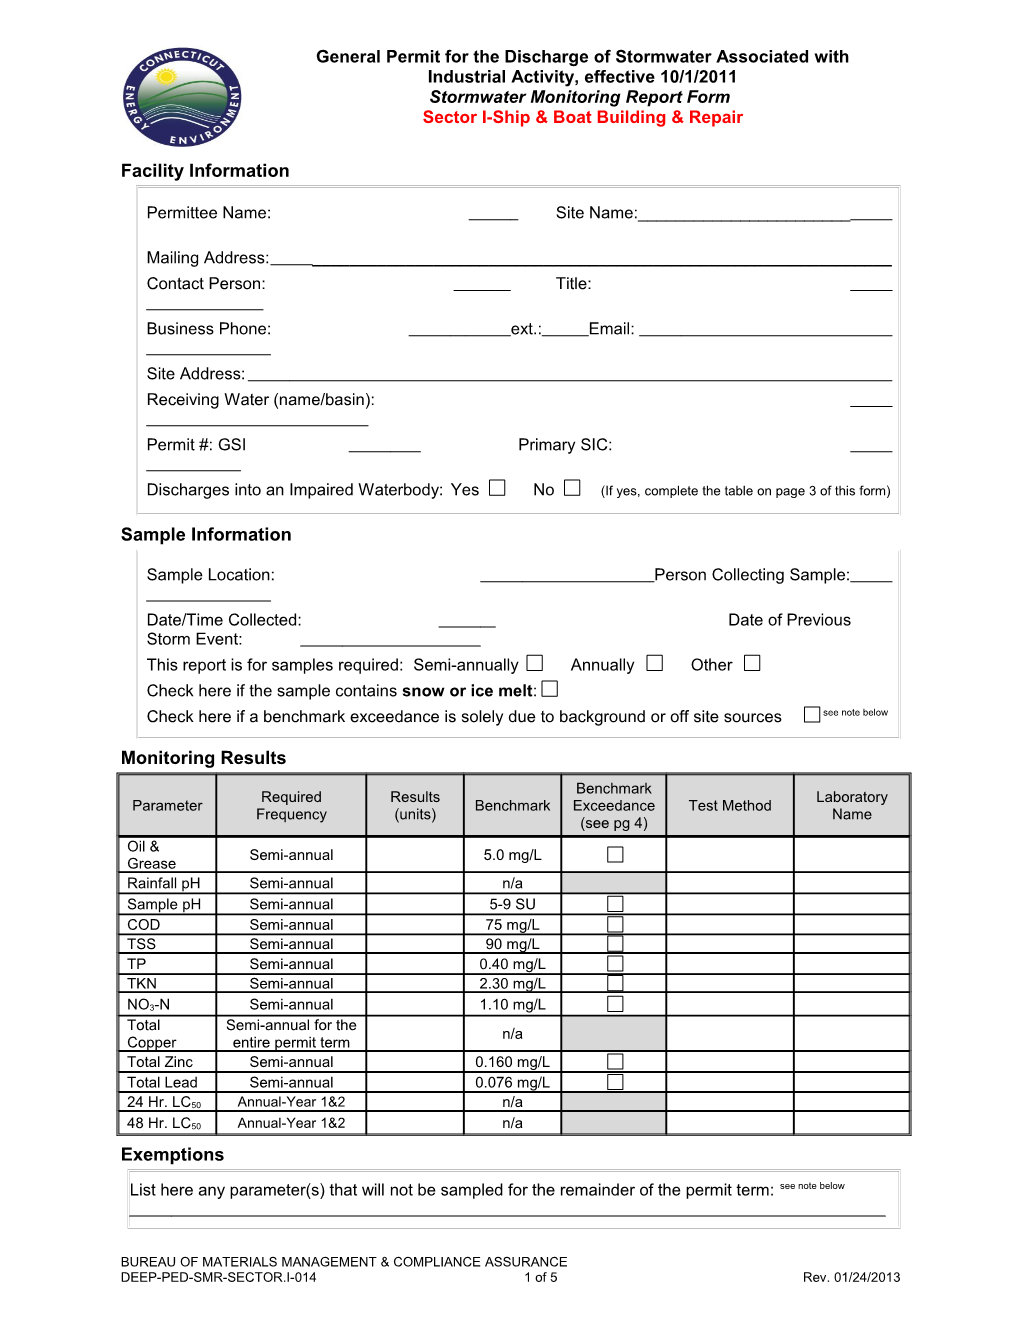 Stormwater Monitoring Form Sector I - Ship & Boat Building & Repair